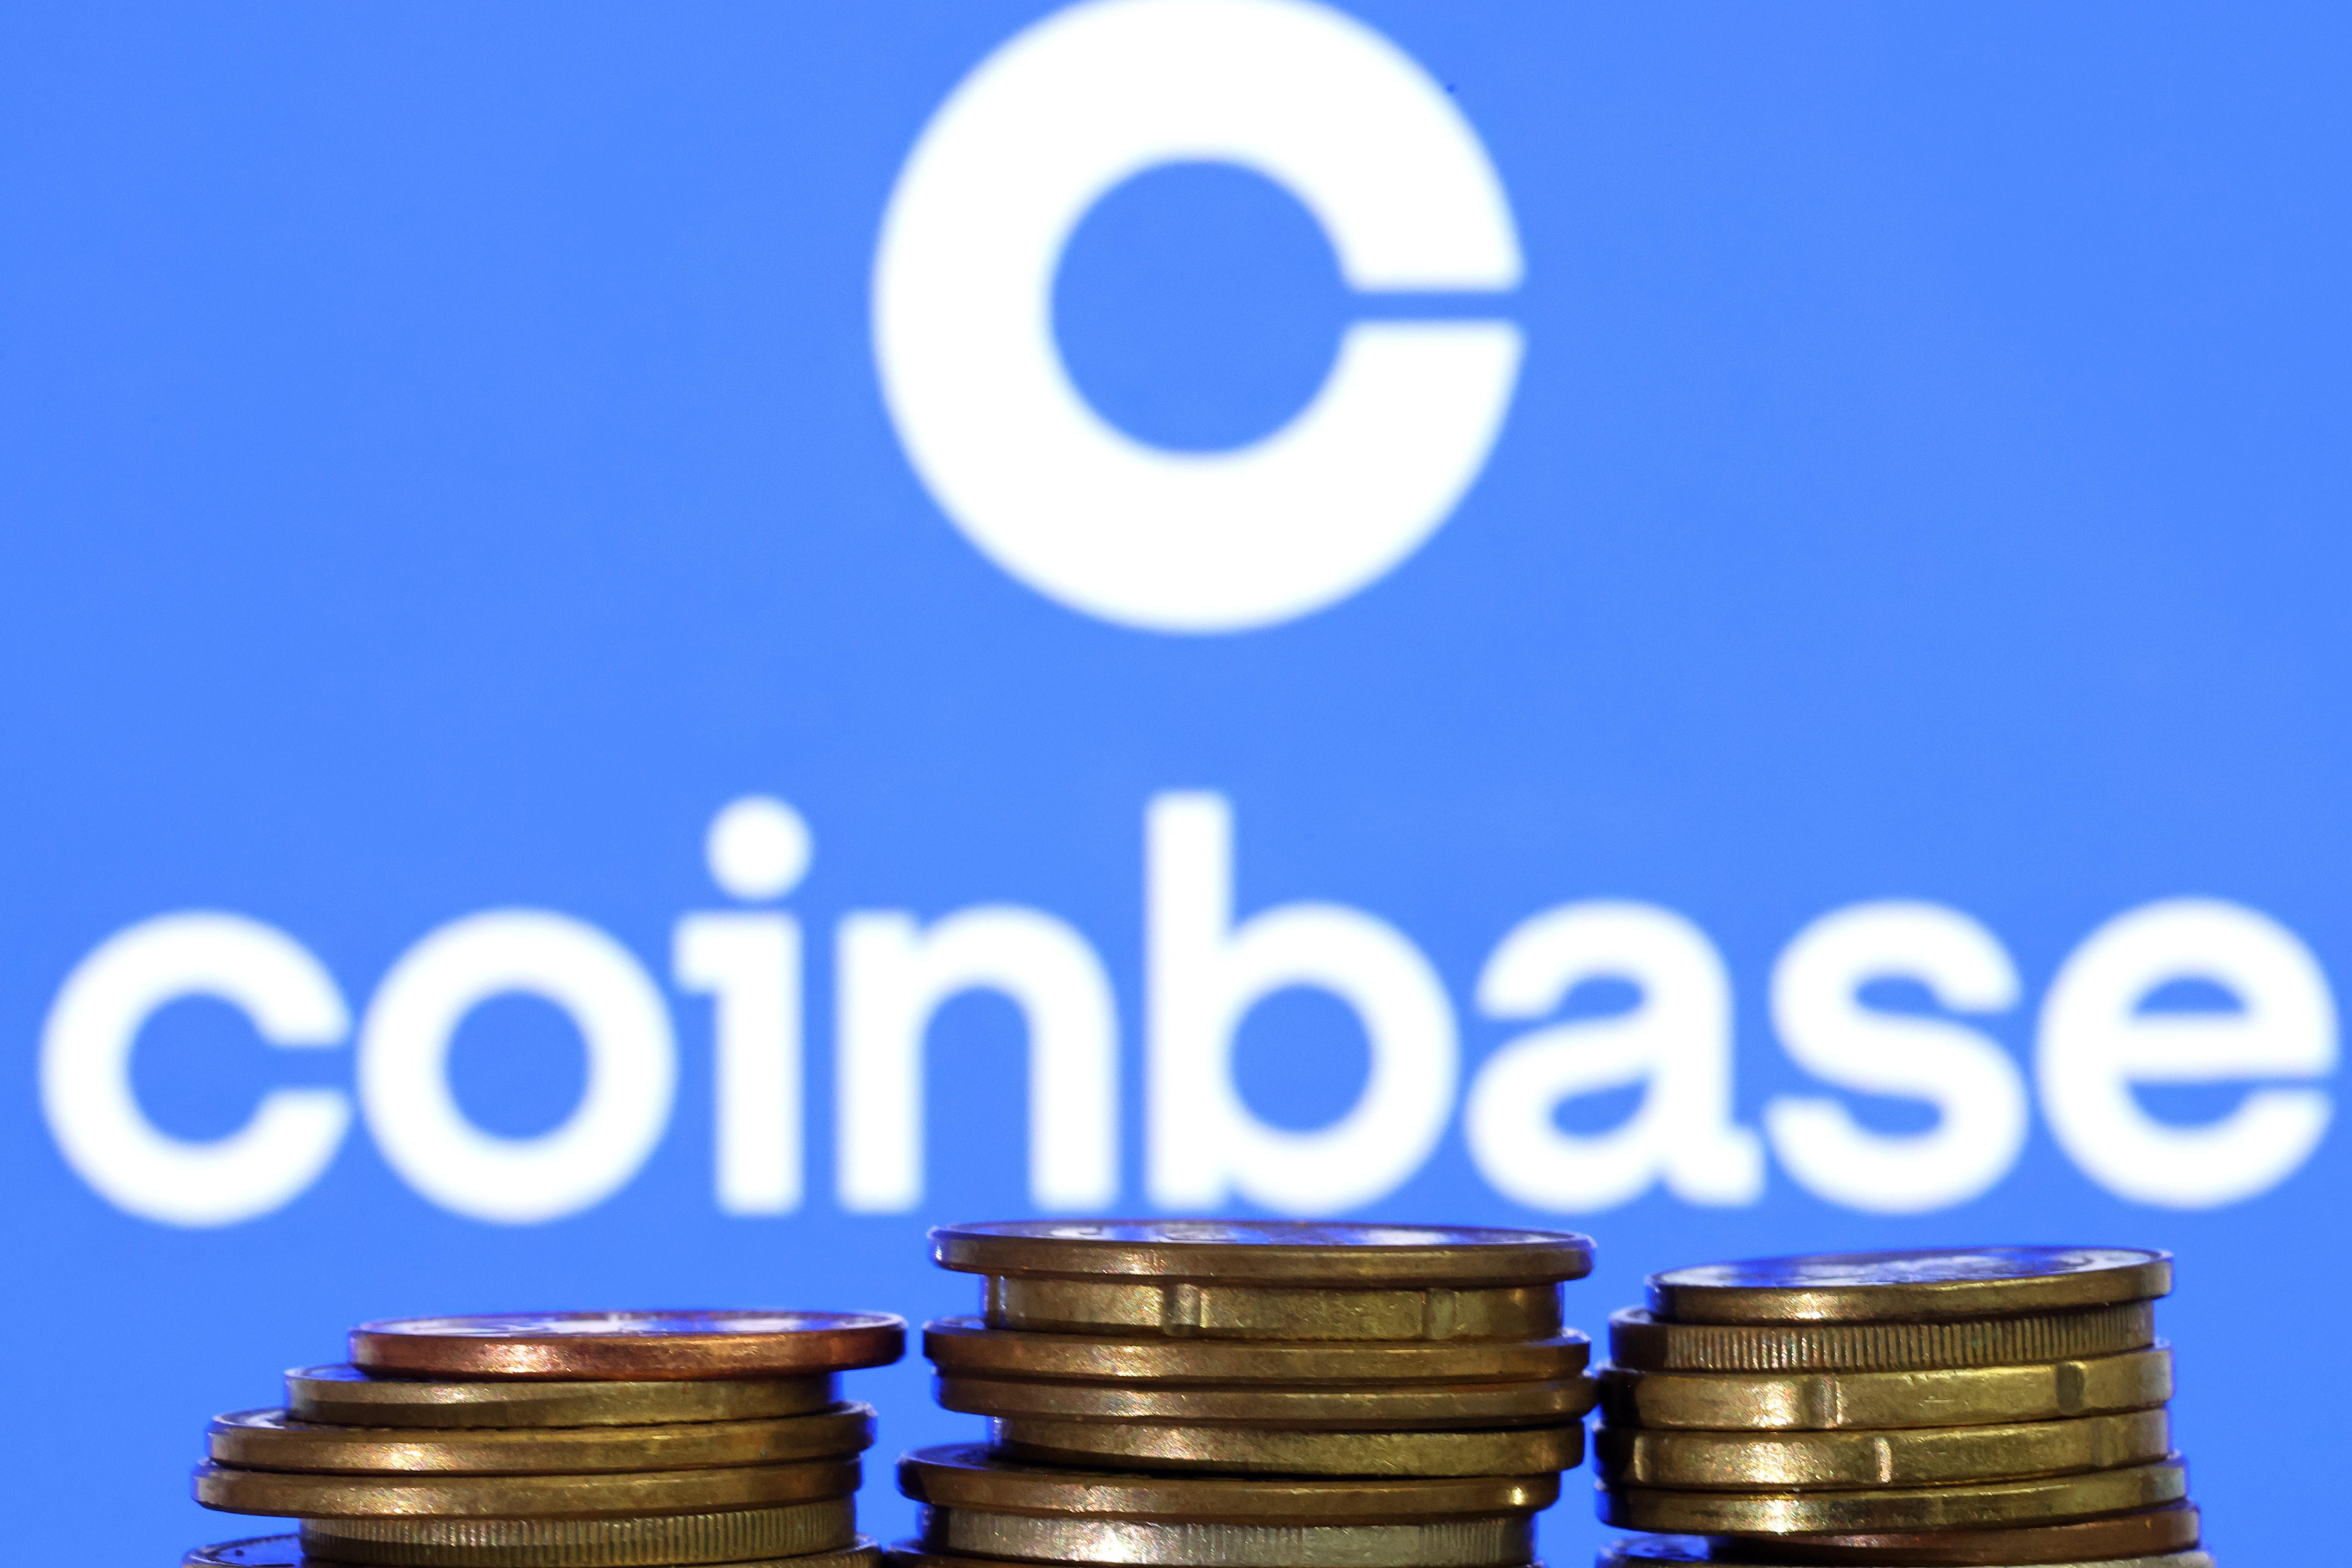 Three stacks of coins seen in front of a screen displaying the Coinbase logo.